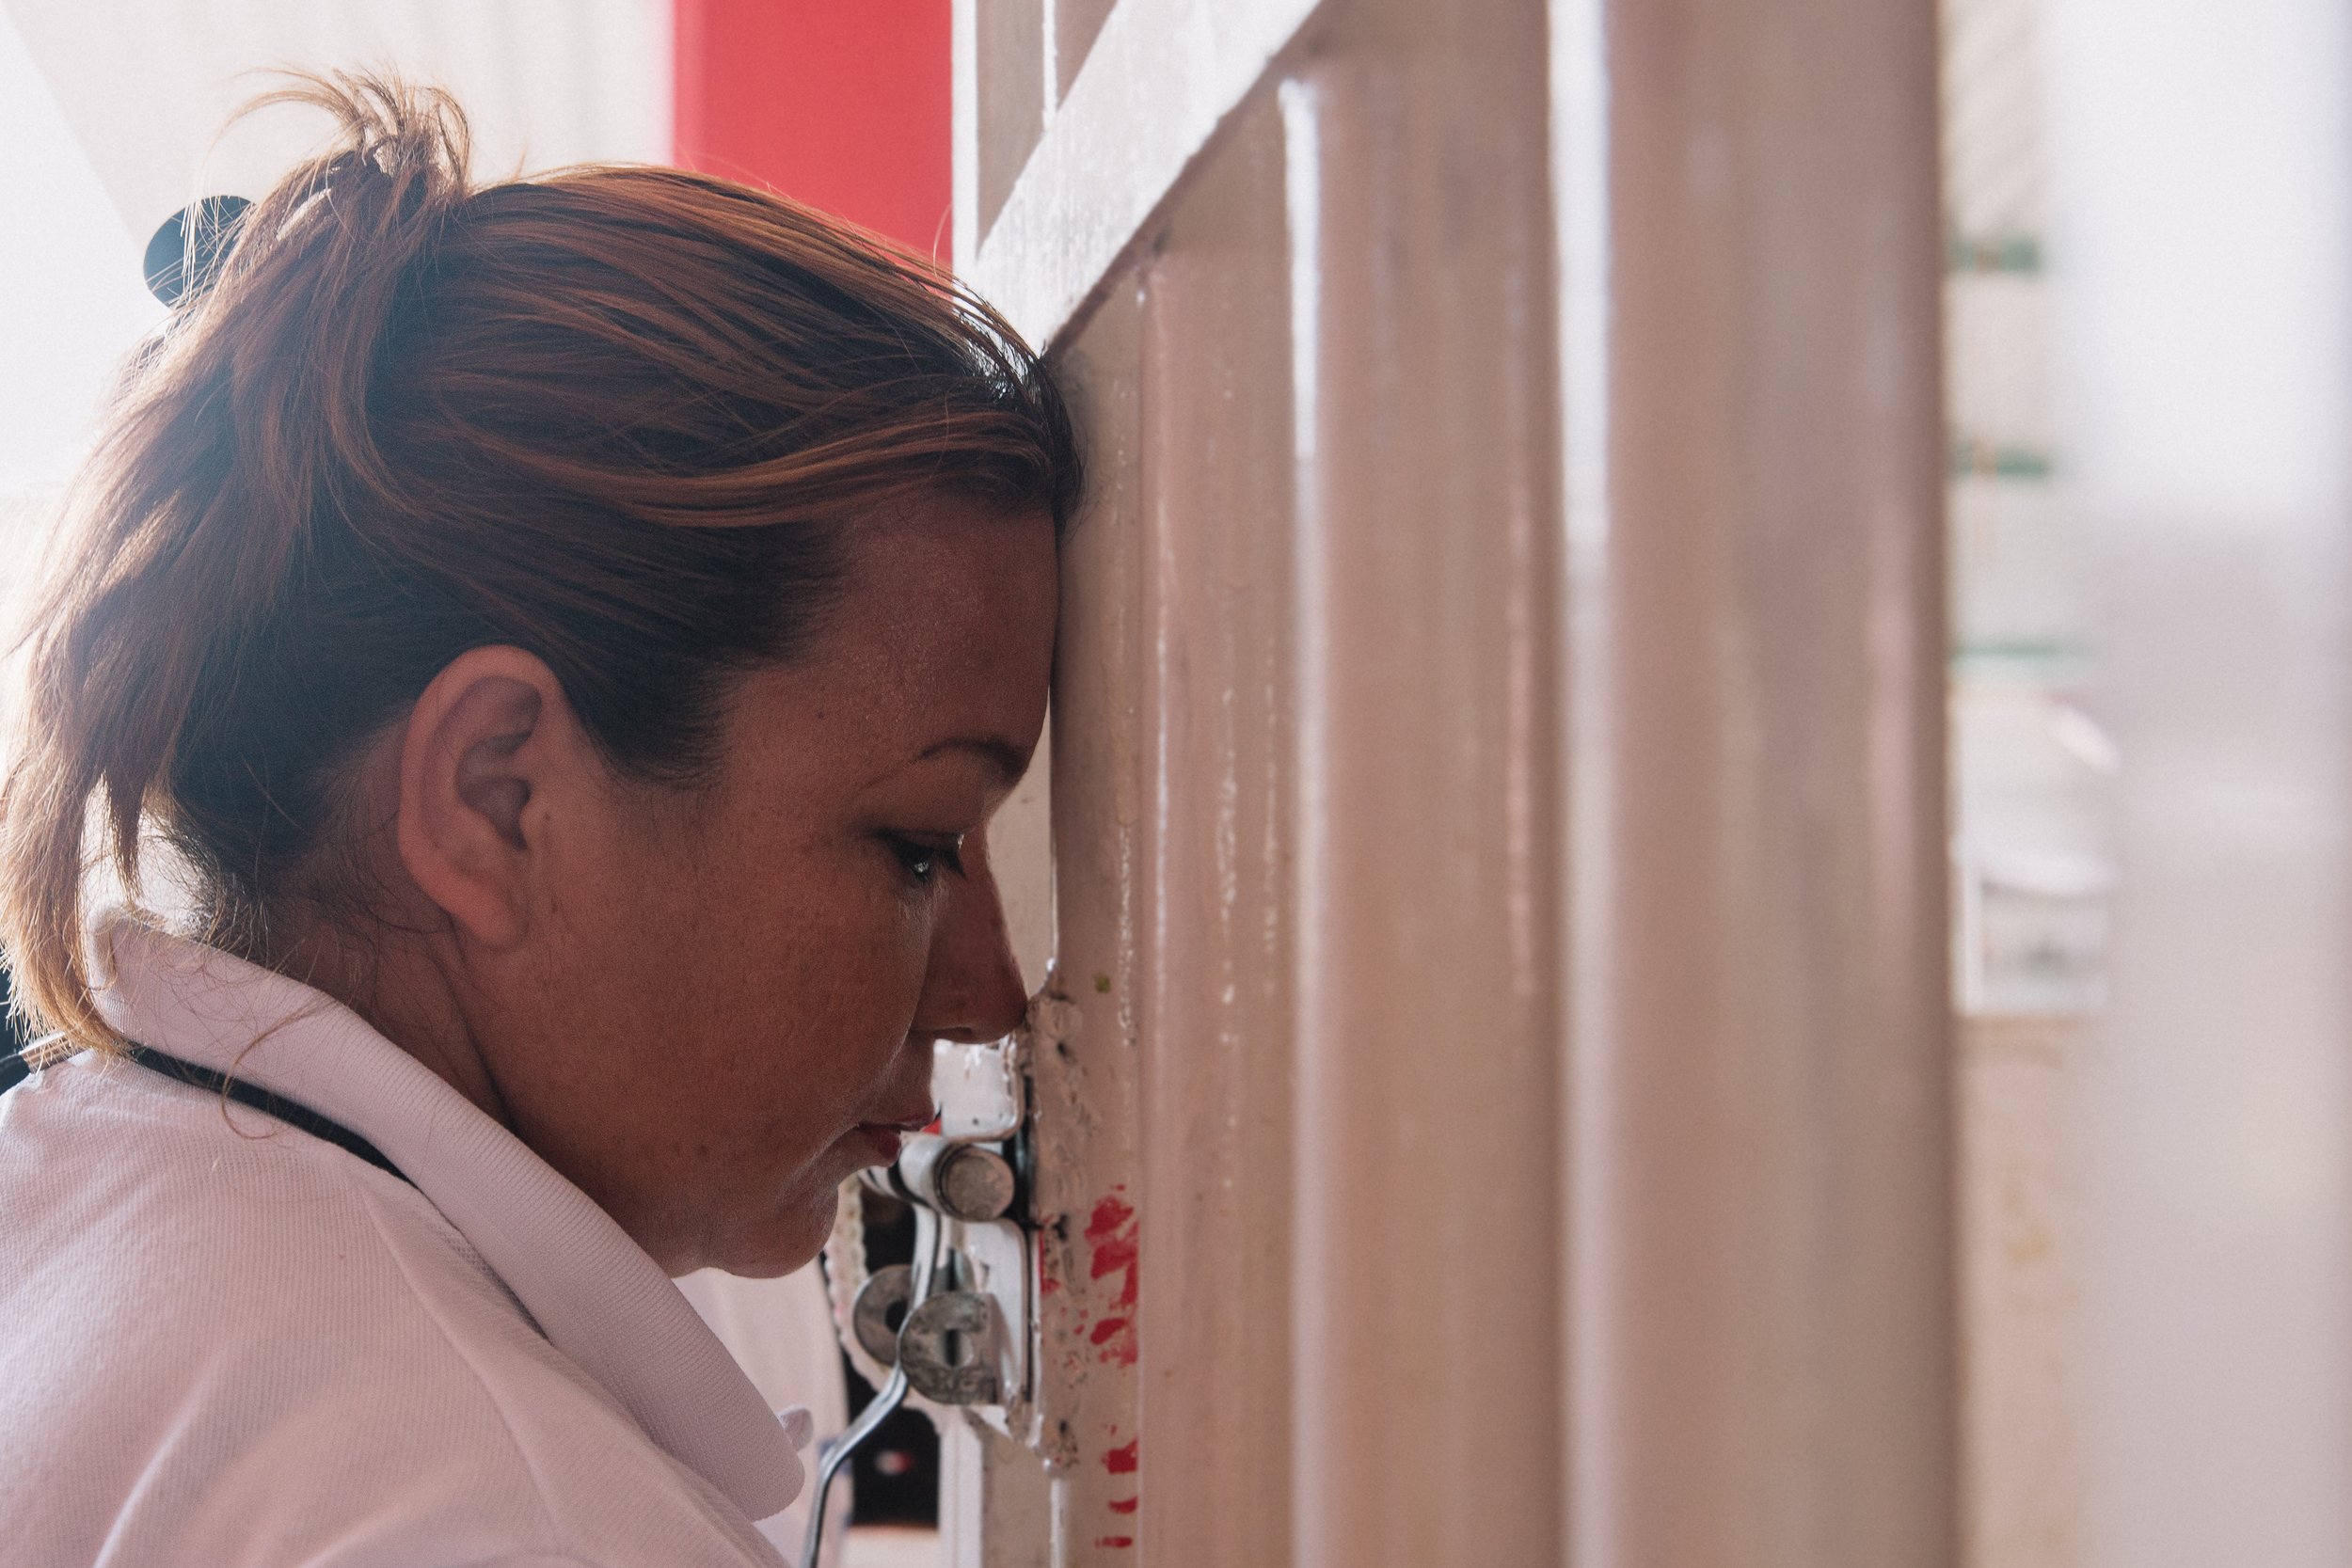  Oneyda Isabel Rodríguez's search for her missing mother Reyna has taken her to a jail in Tapachula, Chiapas, Mexico. As she speaks with female inmates, she can't help but wonder if her mother may have met the same fate as some of these women. Despit